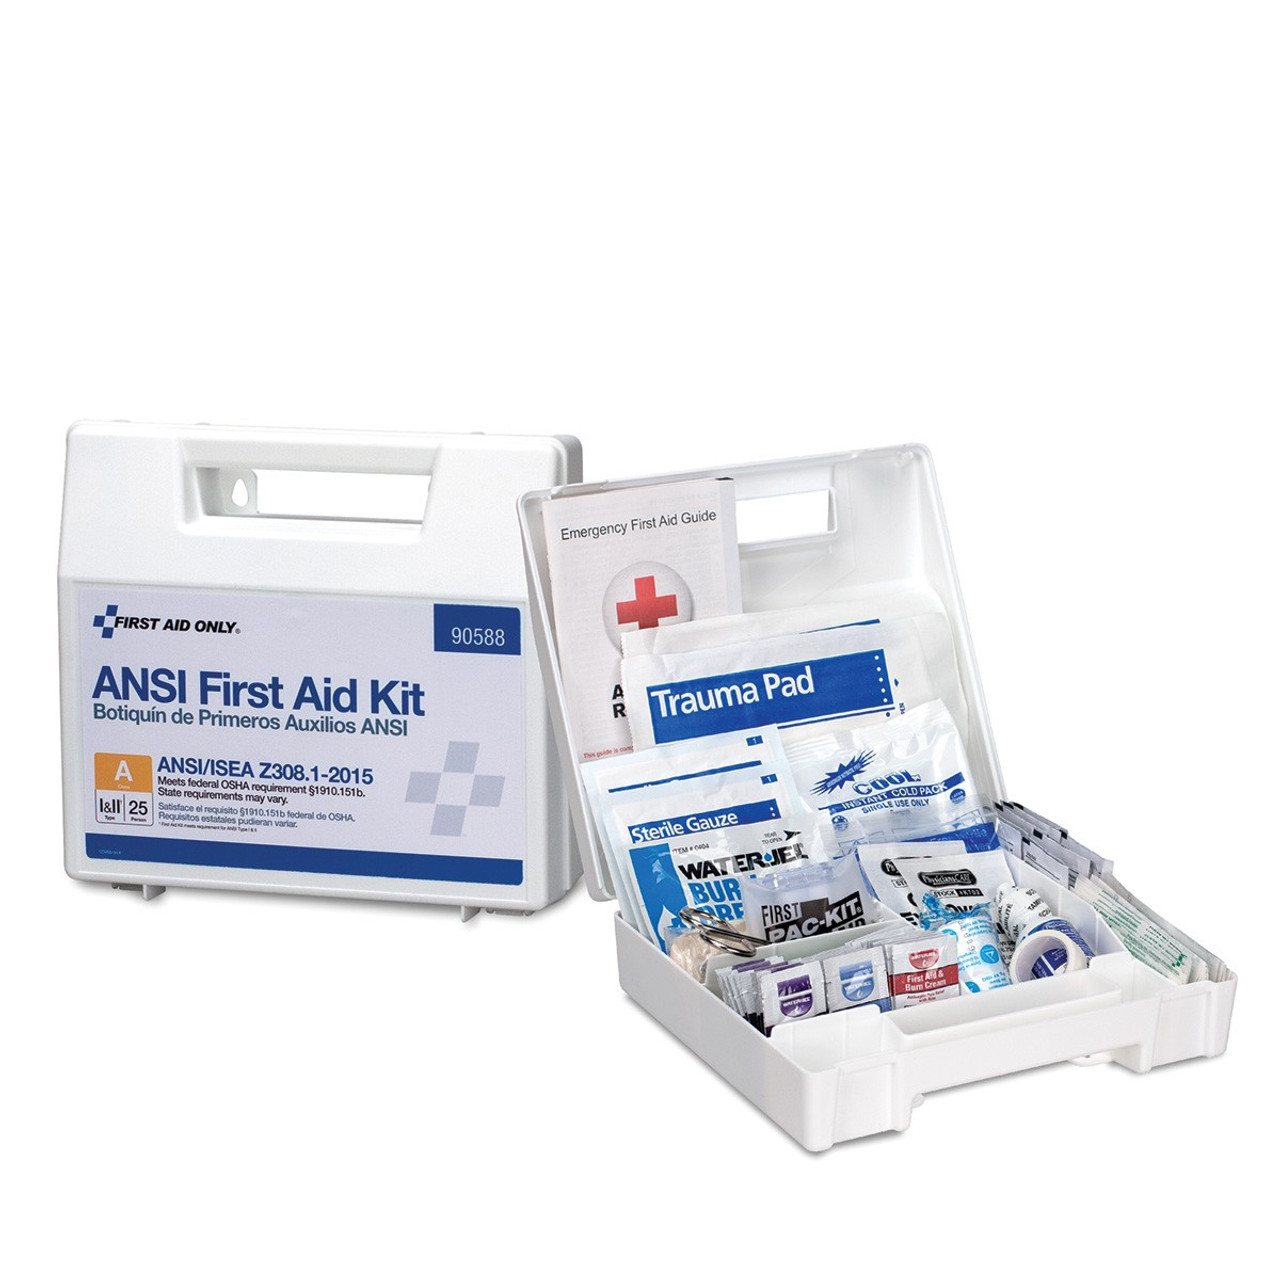 First Aid Kit: 25-Person Class A ANSI Z308.1-2021 - 25-Person Class A Type III